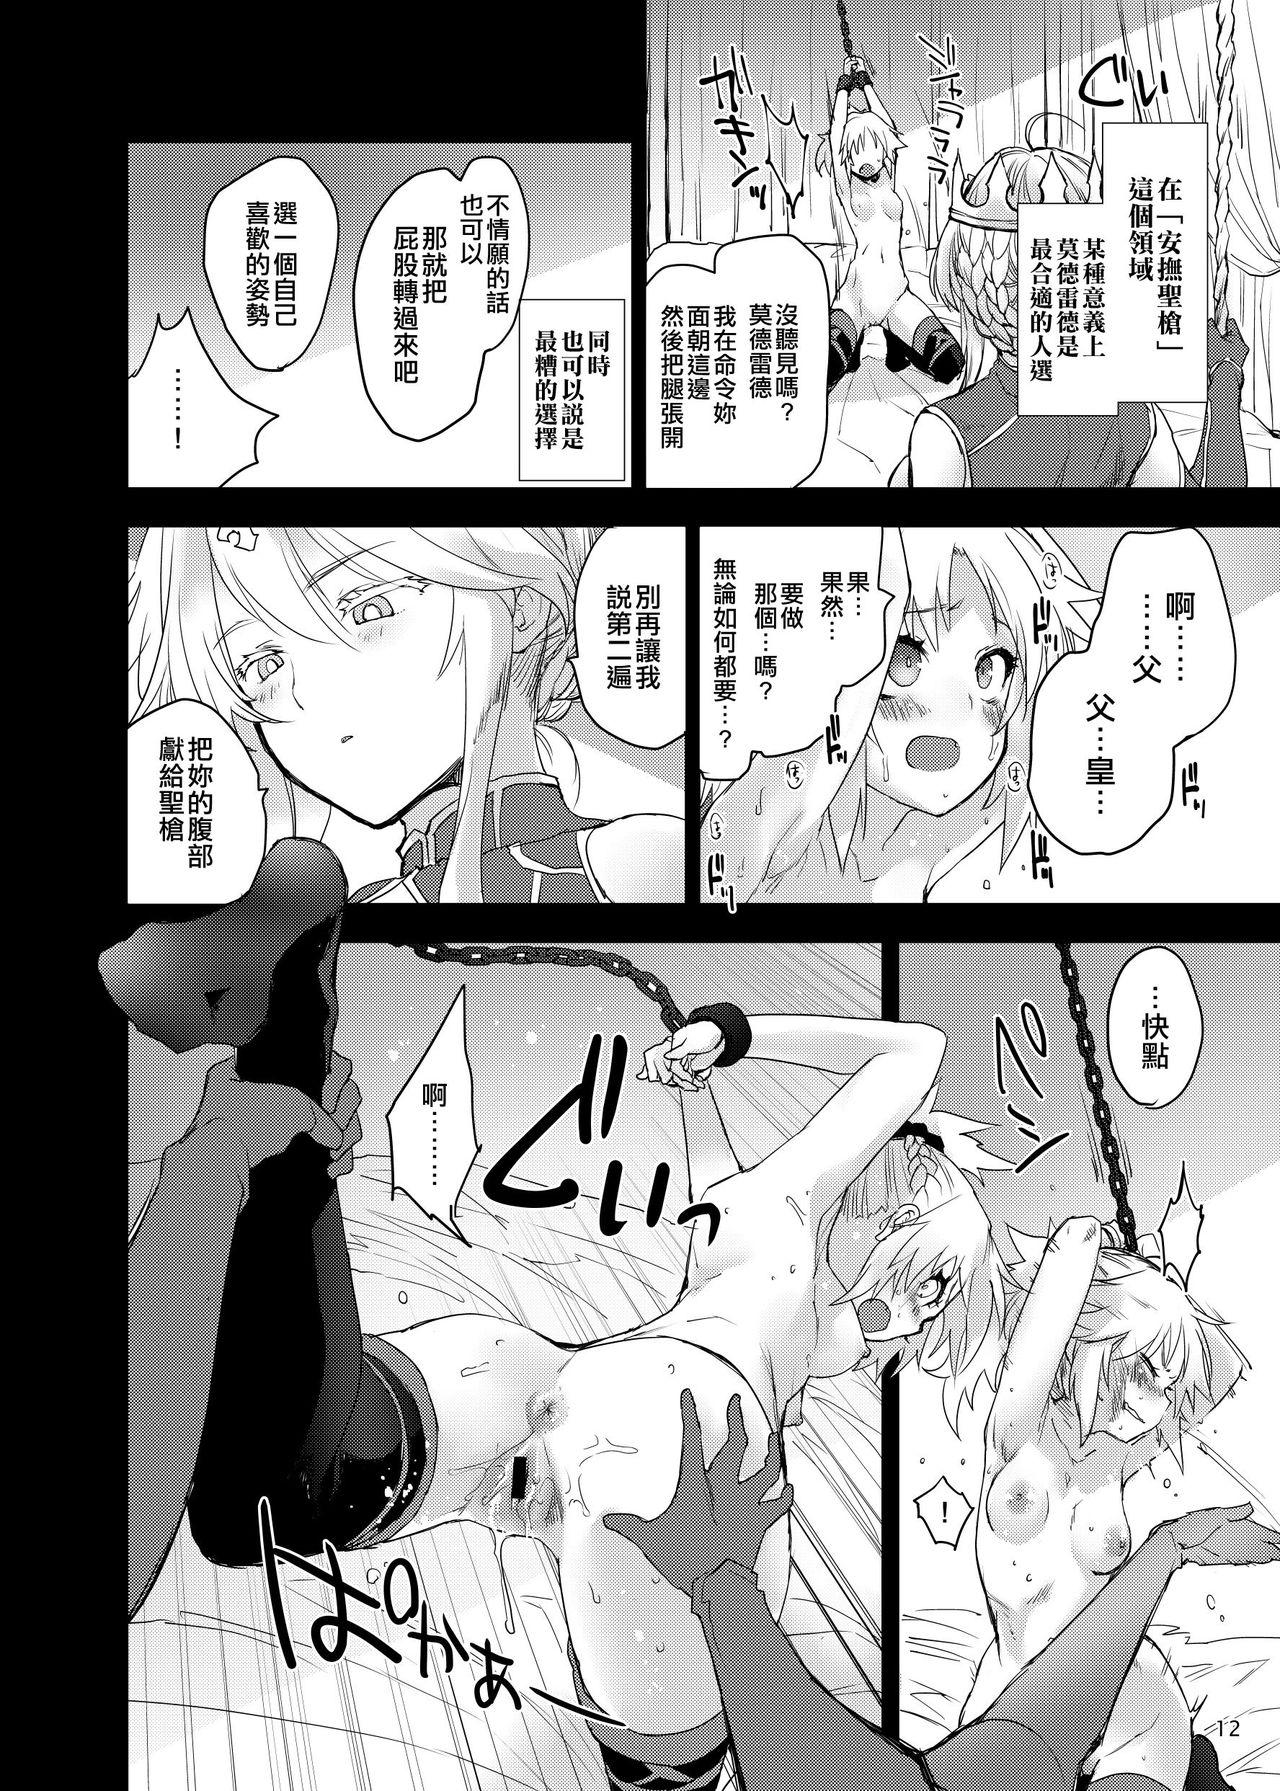 Tease "Seisou" Batsubyou - Fate grand order Hotel - Page 12